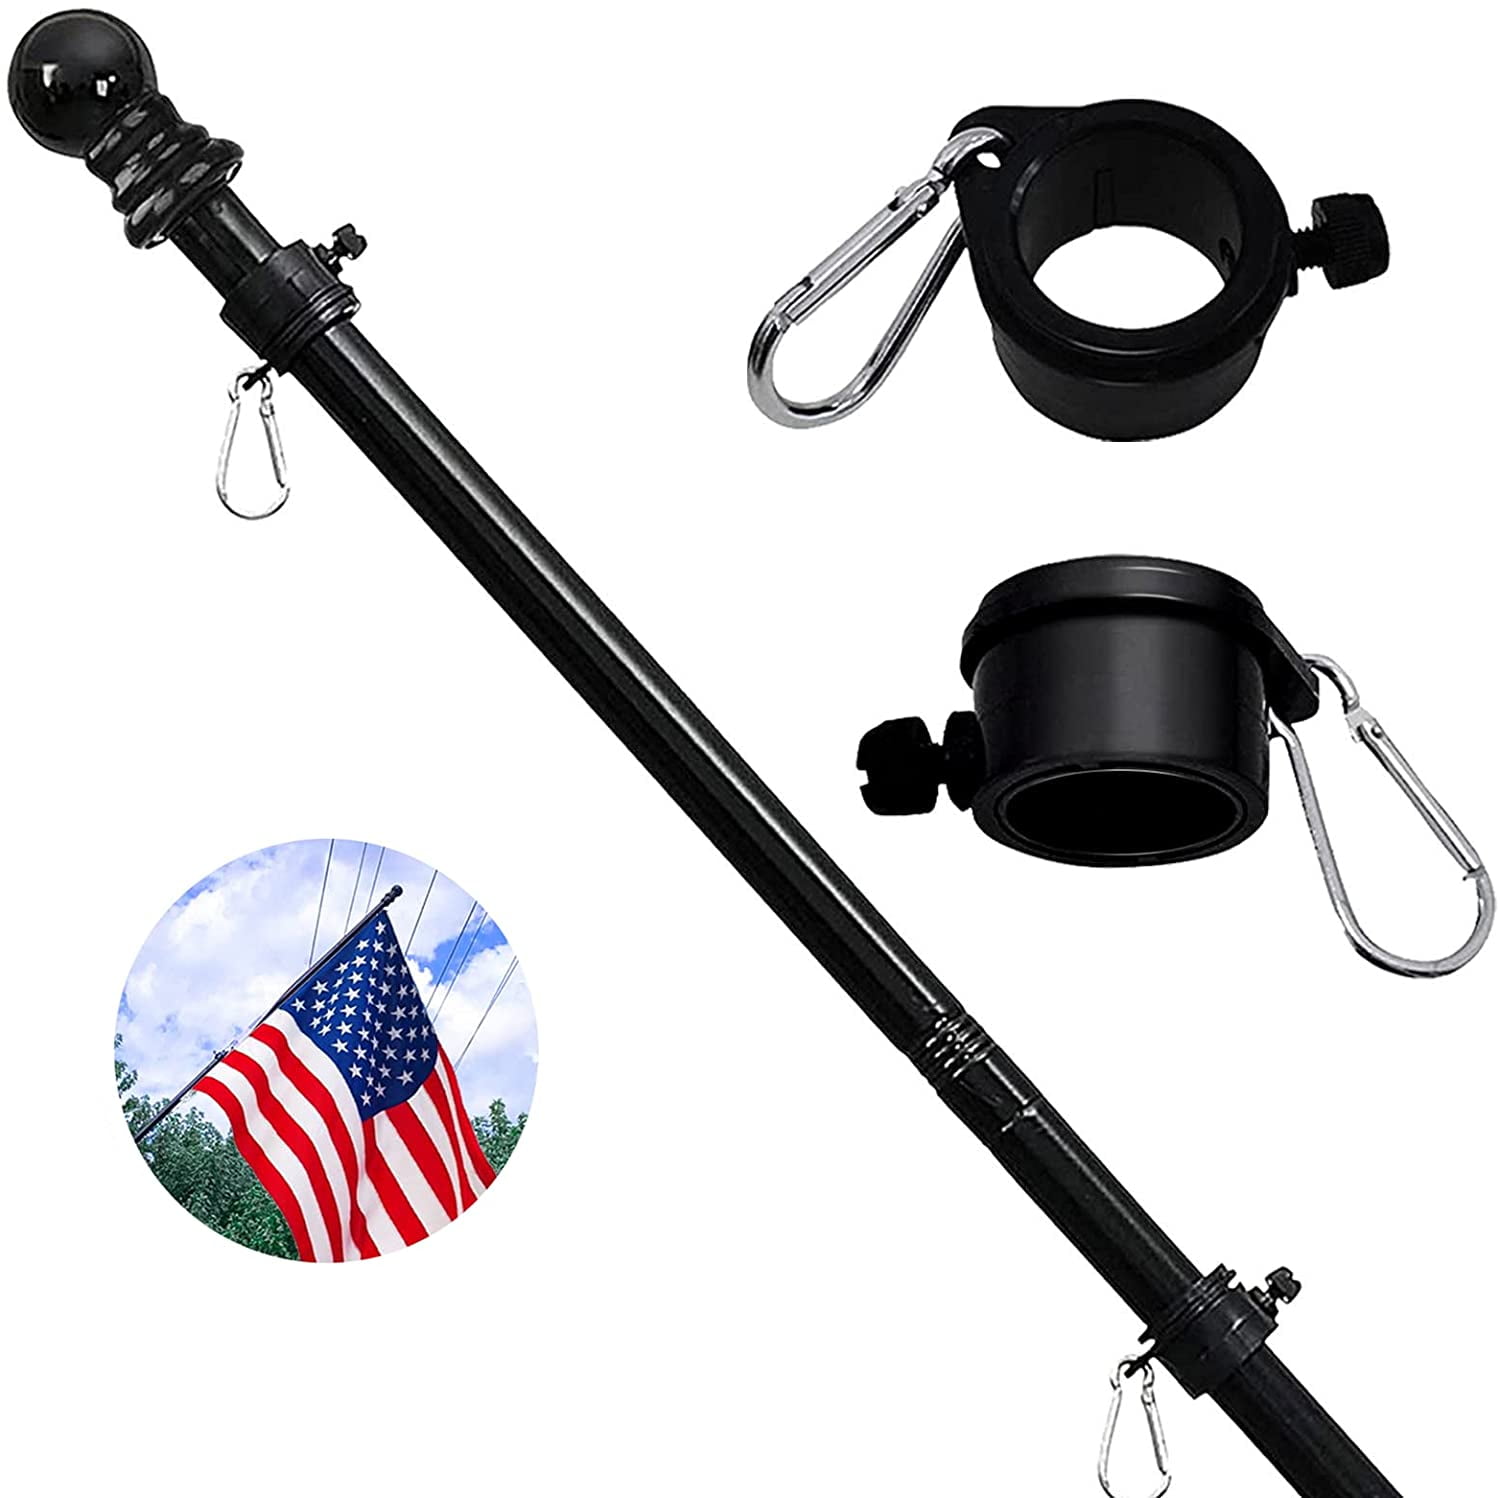 Yeesun Flag Pole Kit,6 Foot American Flag Pole & Bracket-Flagpoles for 3 x 5 Flags Holder,Home Porch or Outdoor,Tangle Free and Wall Mount Metal Flag Pole with Flag Silver